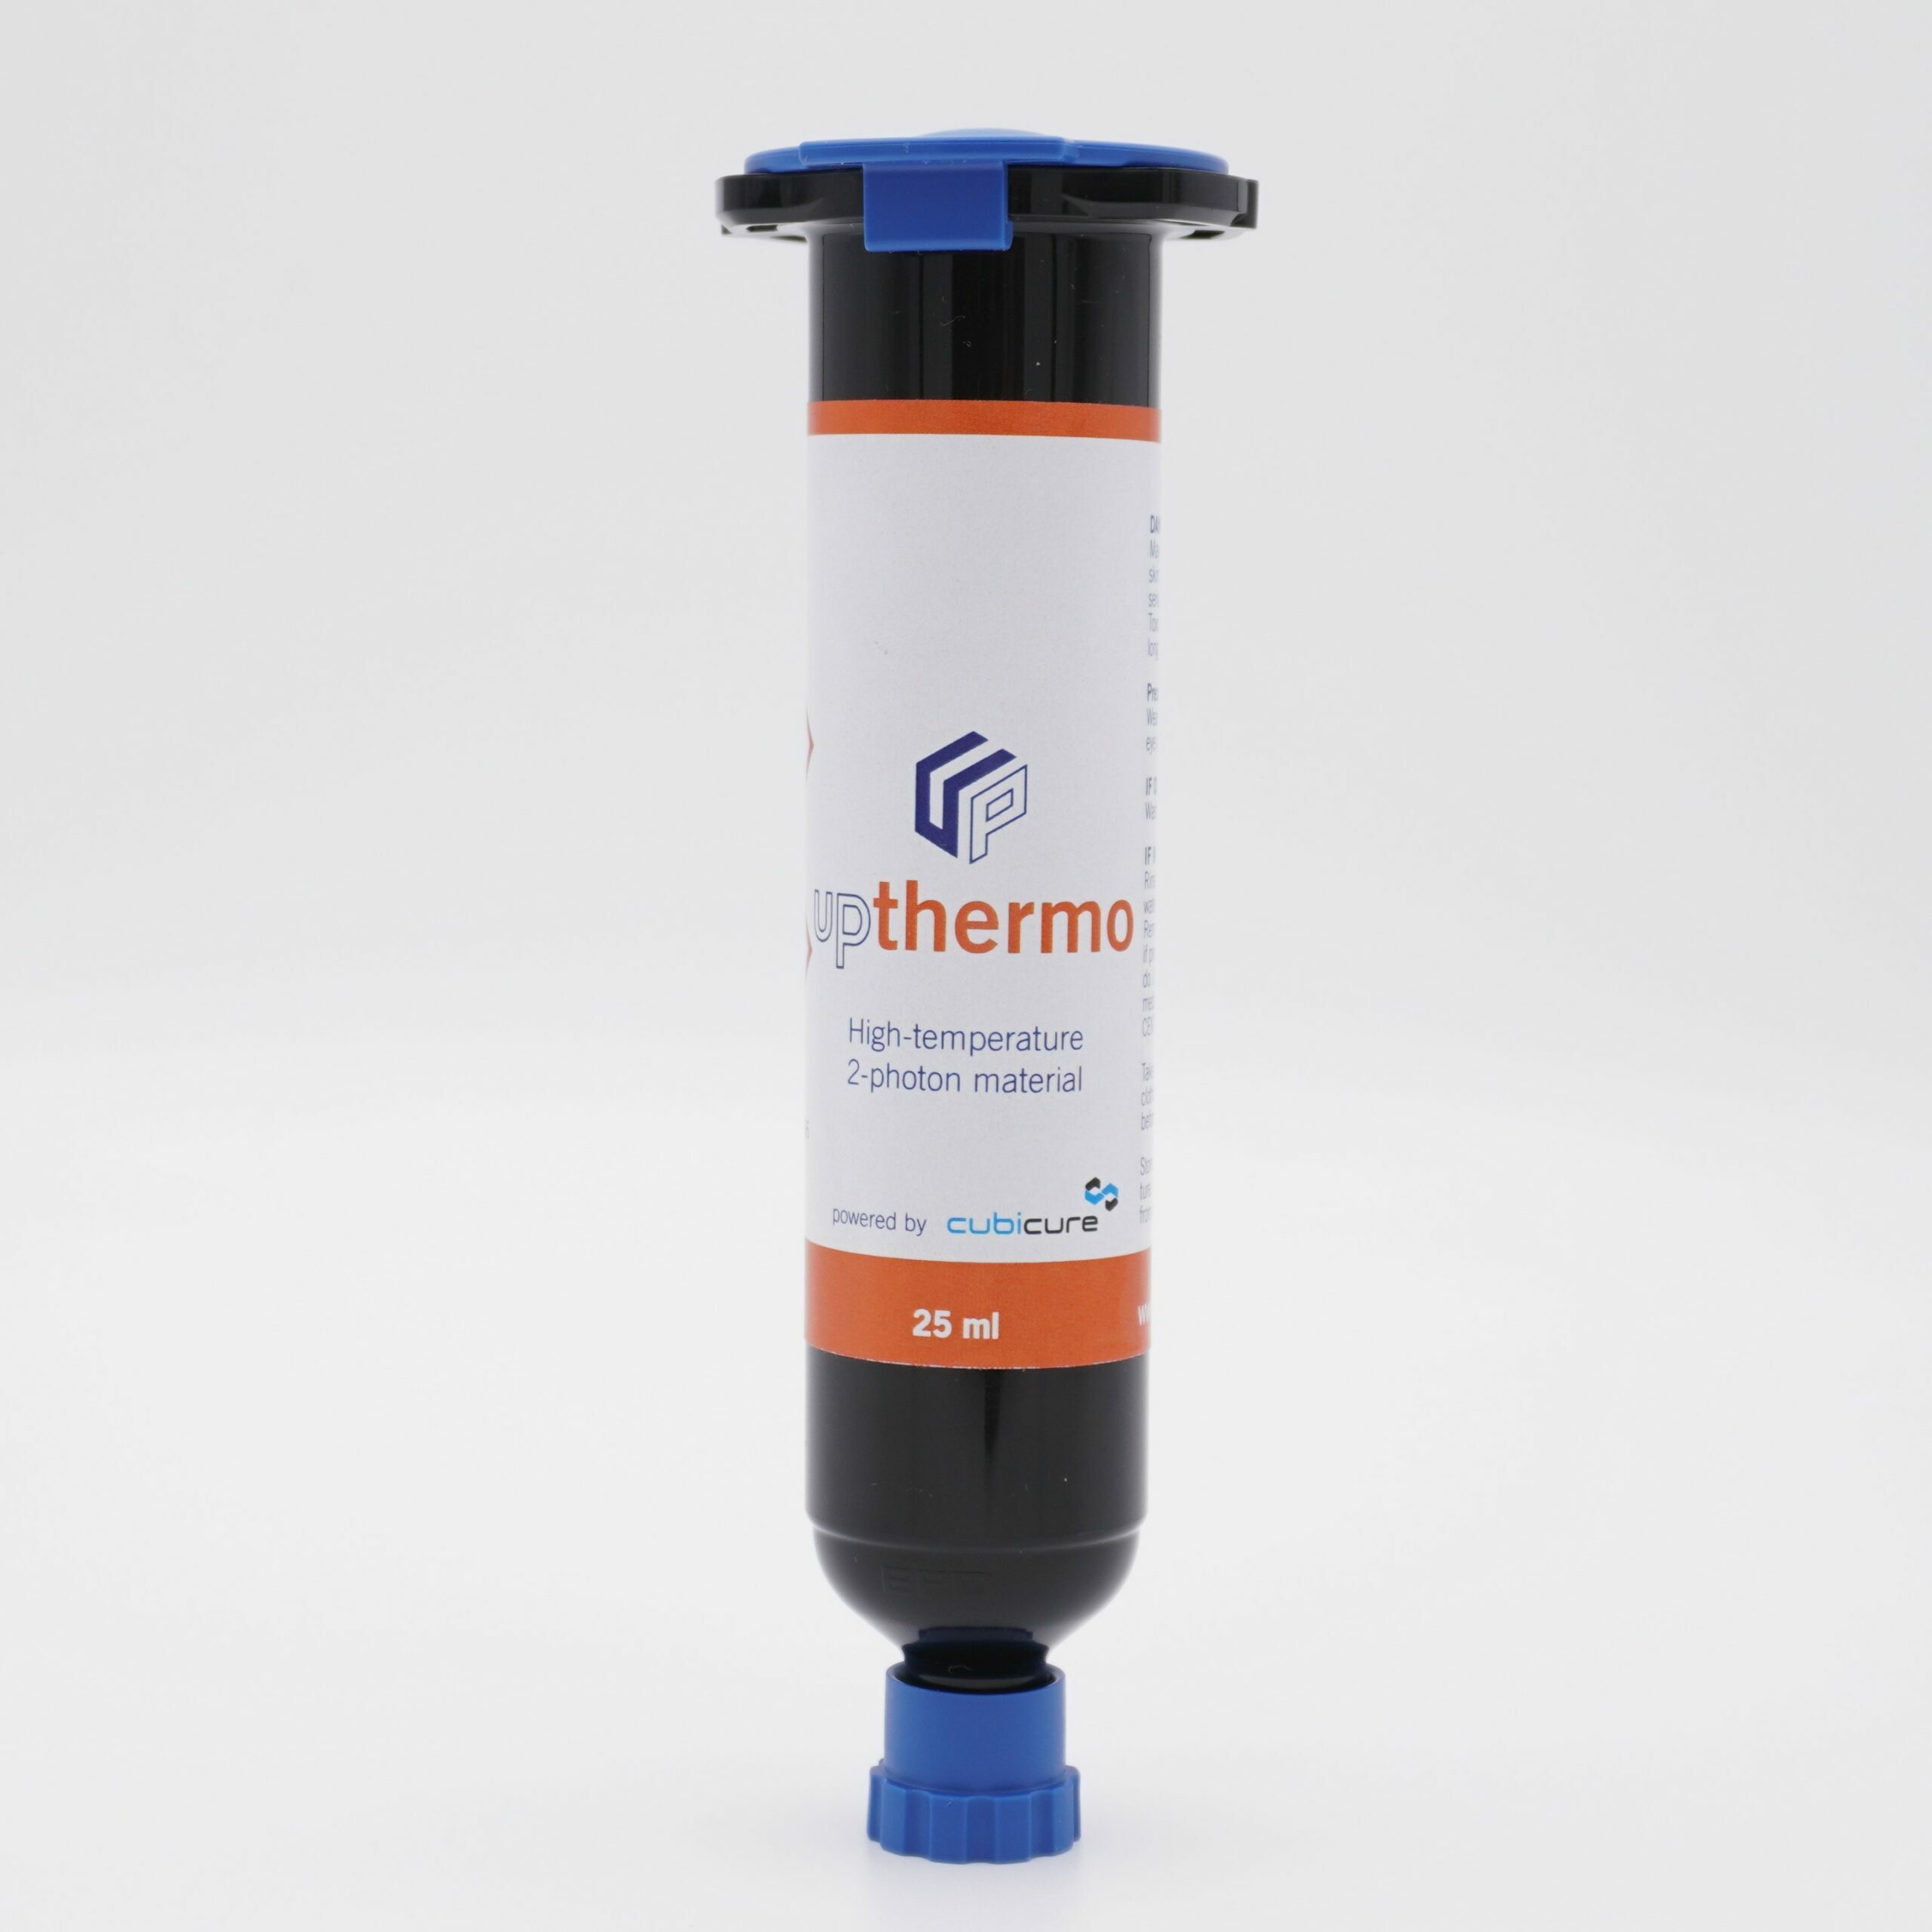 UpThermo powered by Cubicure